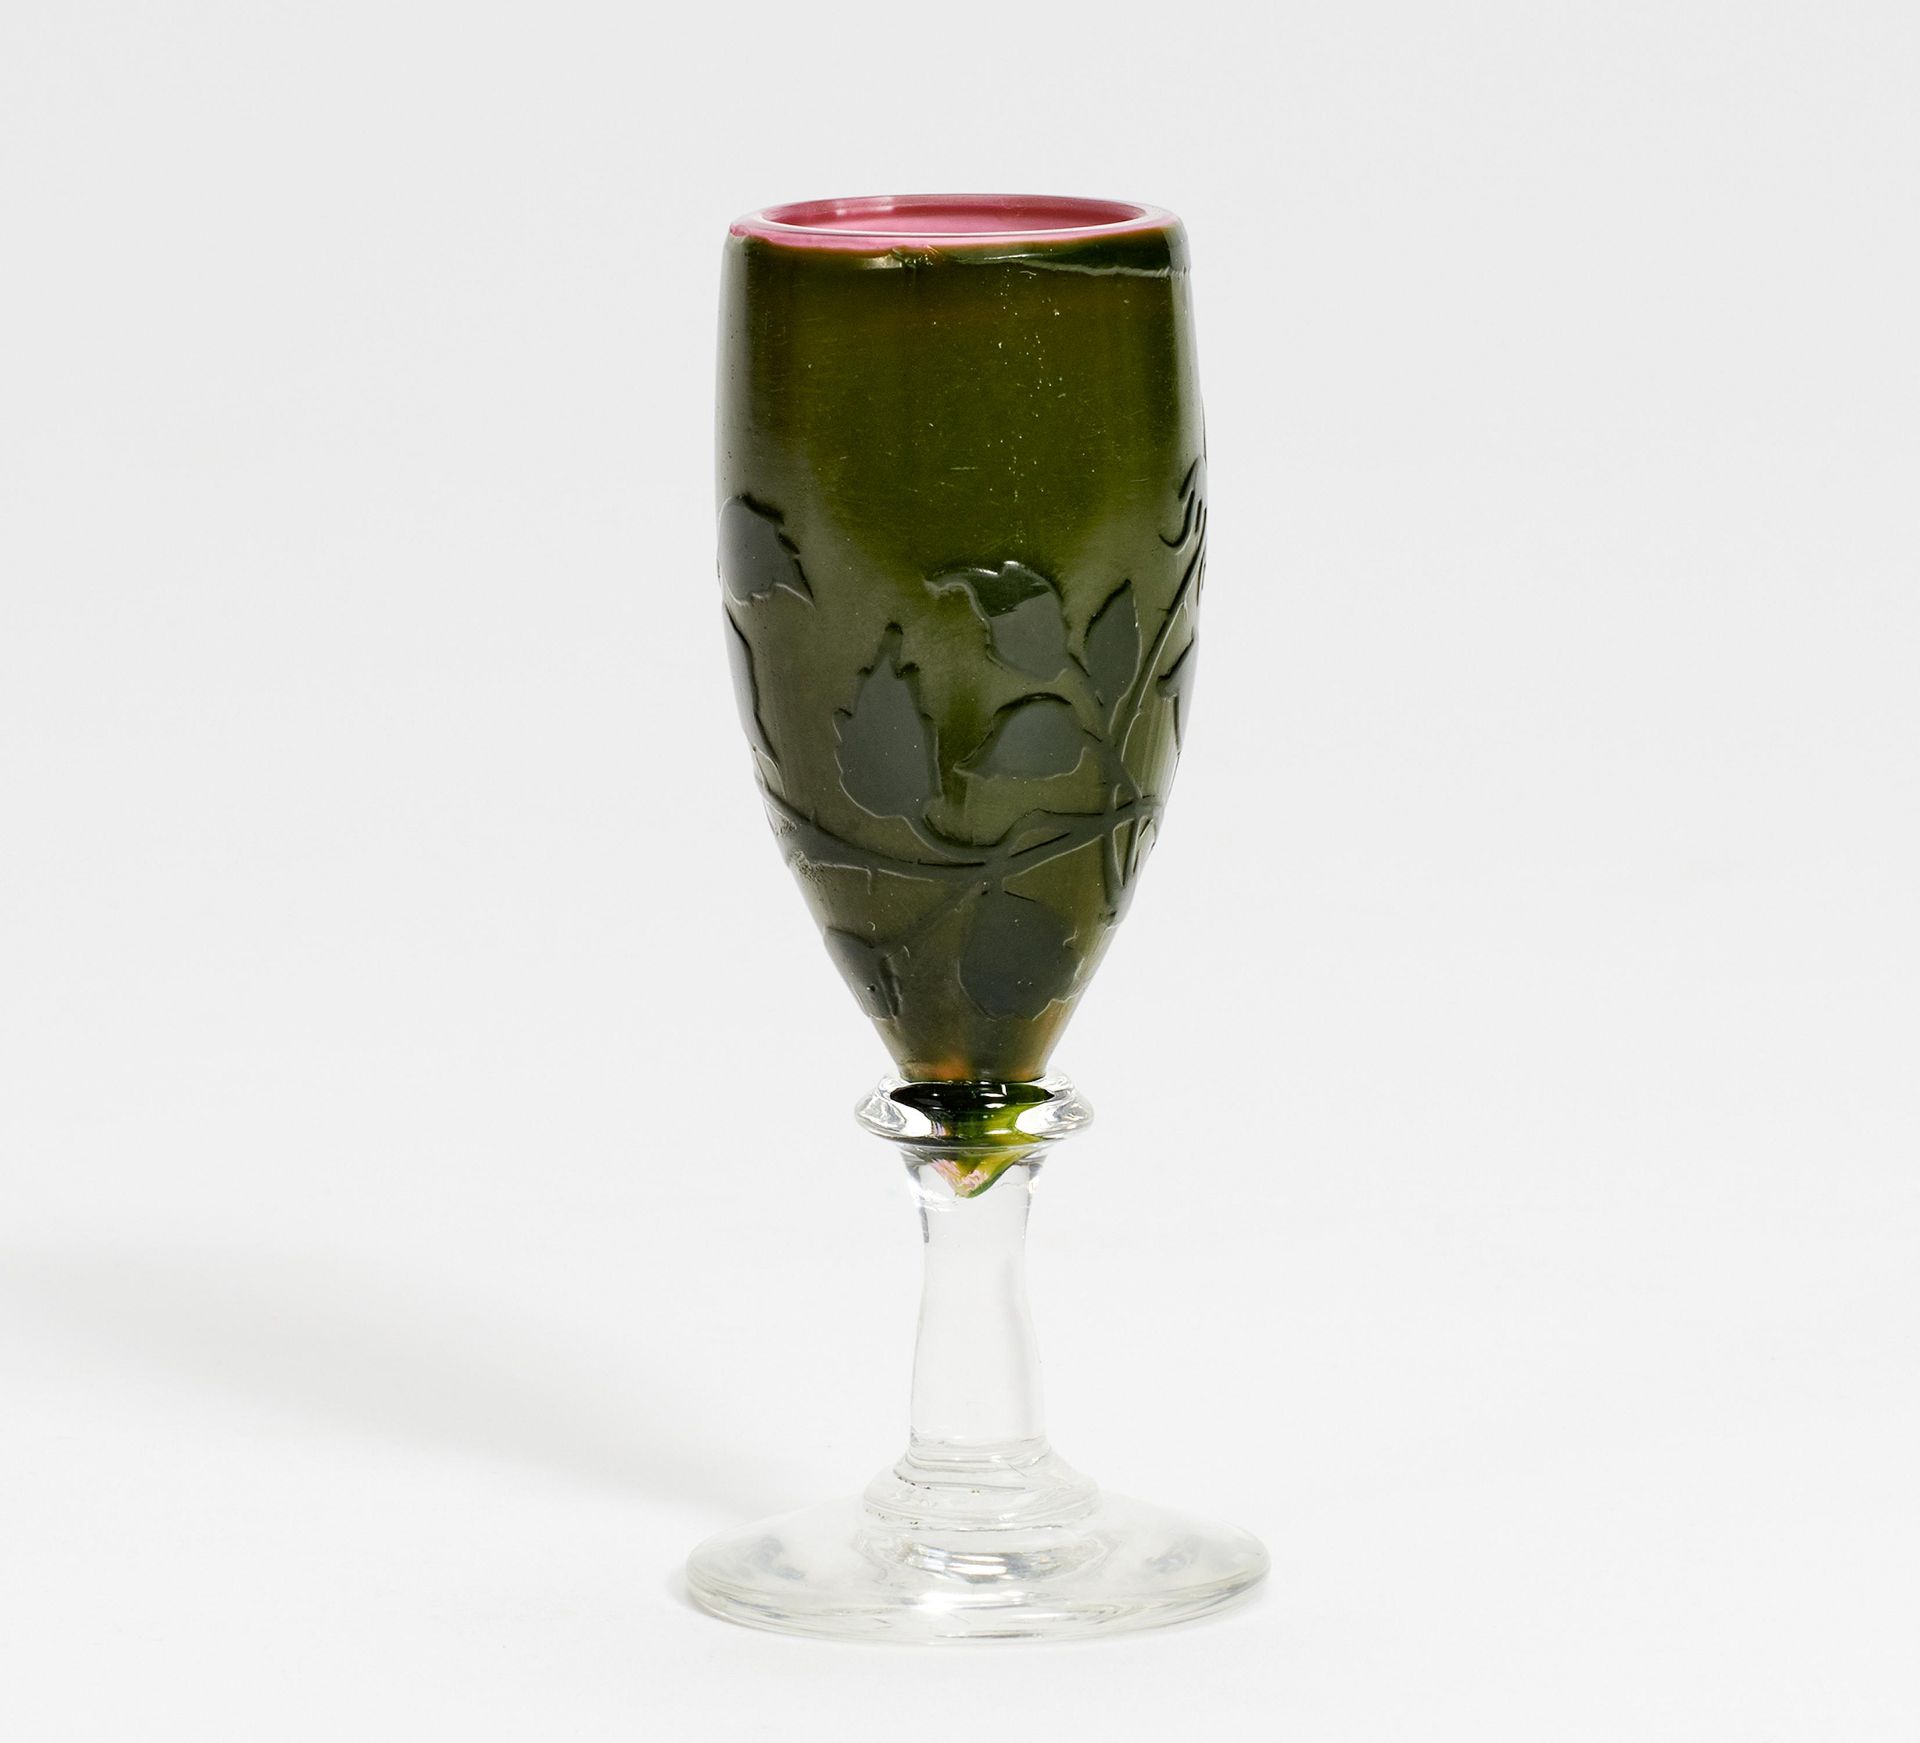 MINIATURE GLASS CHALICE WITH ROSE TENDRILS